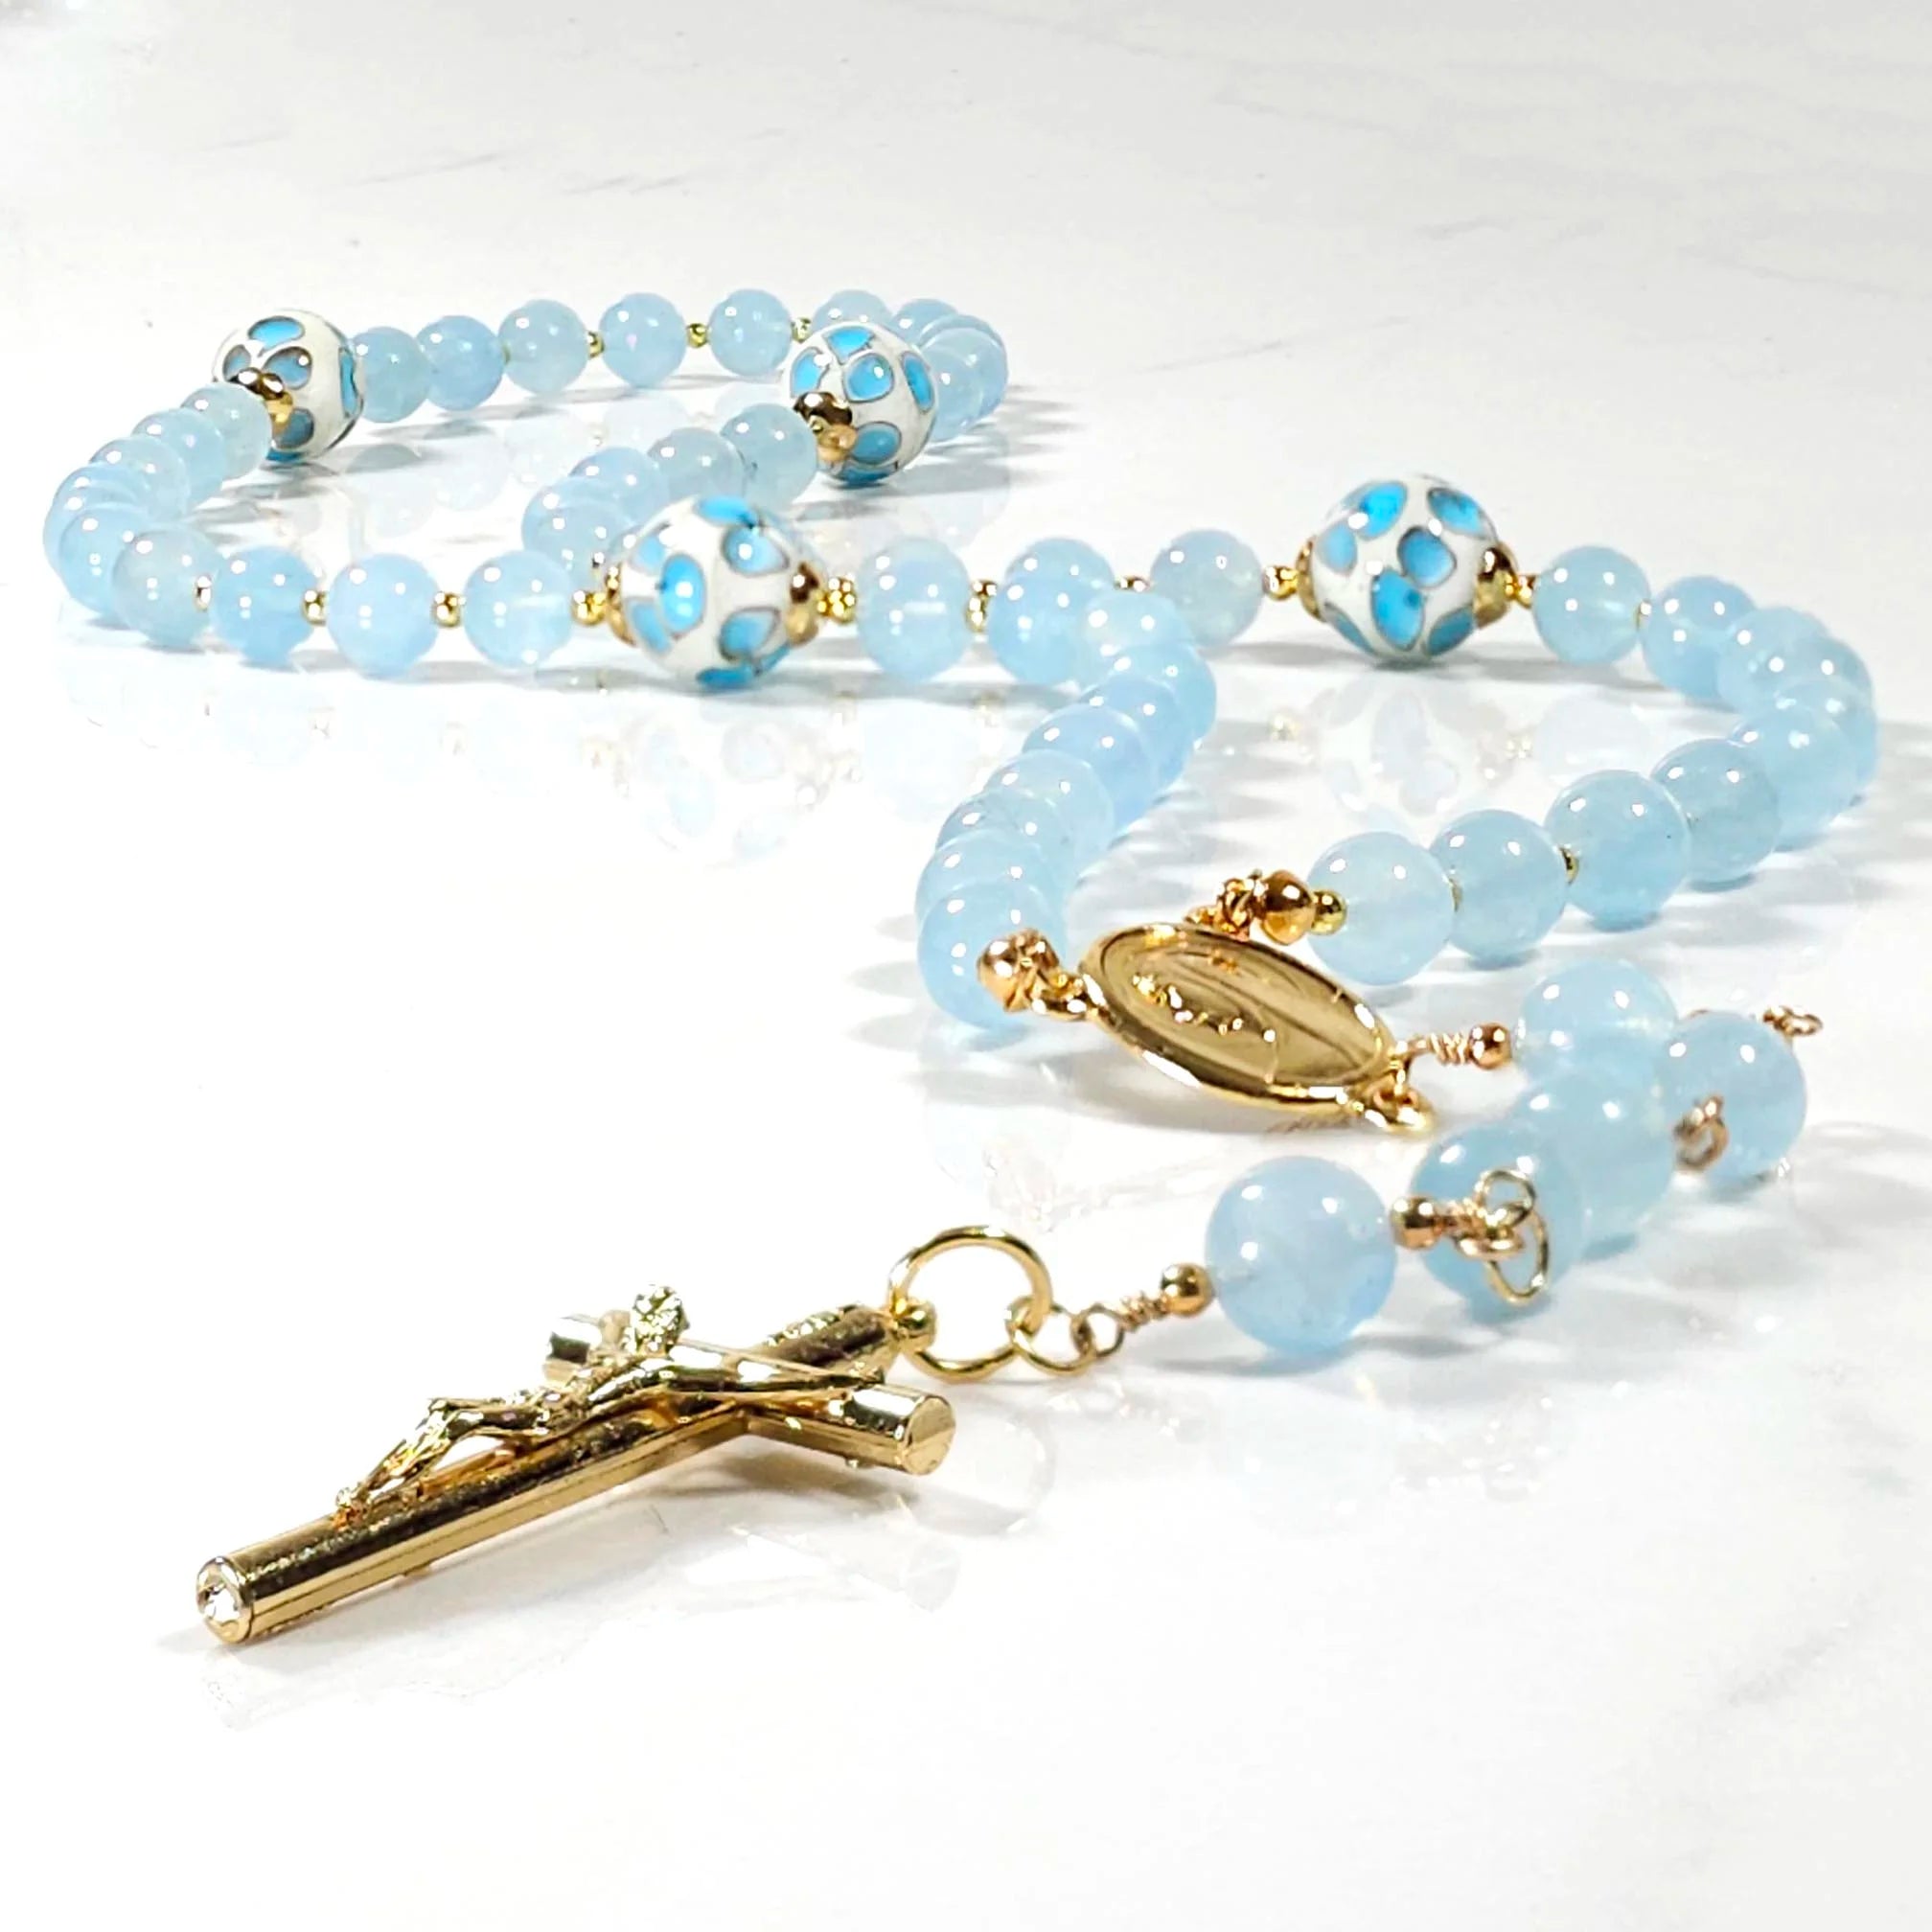 The best Blue Rosary.